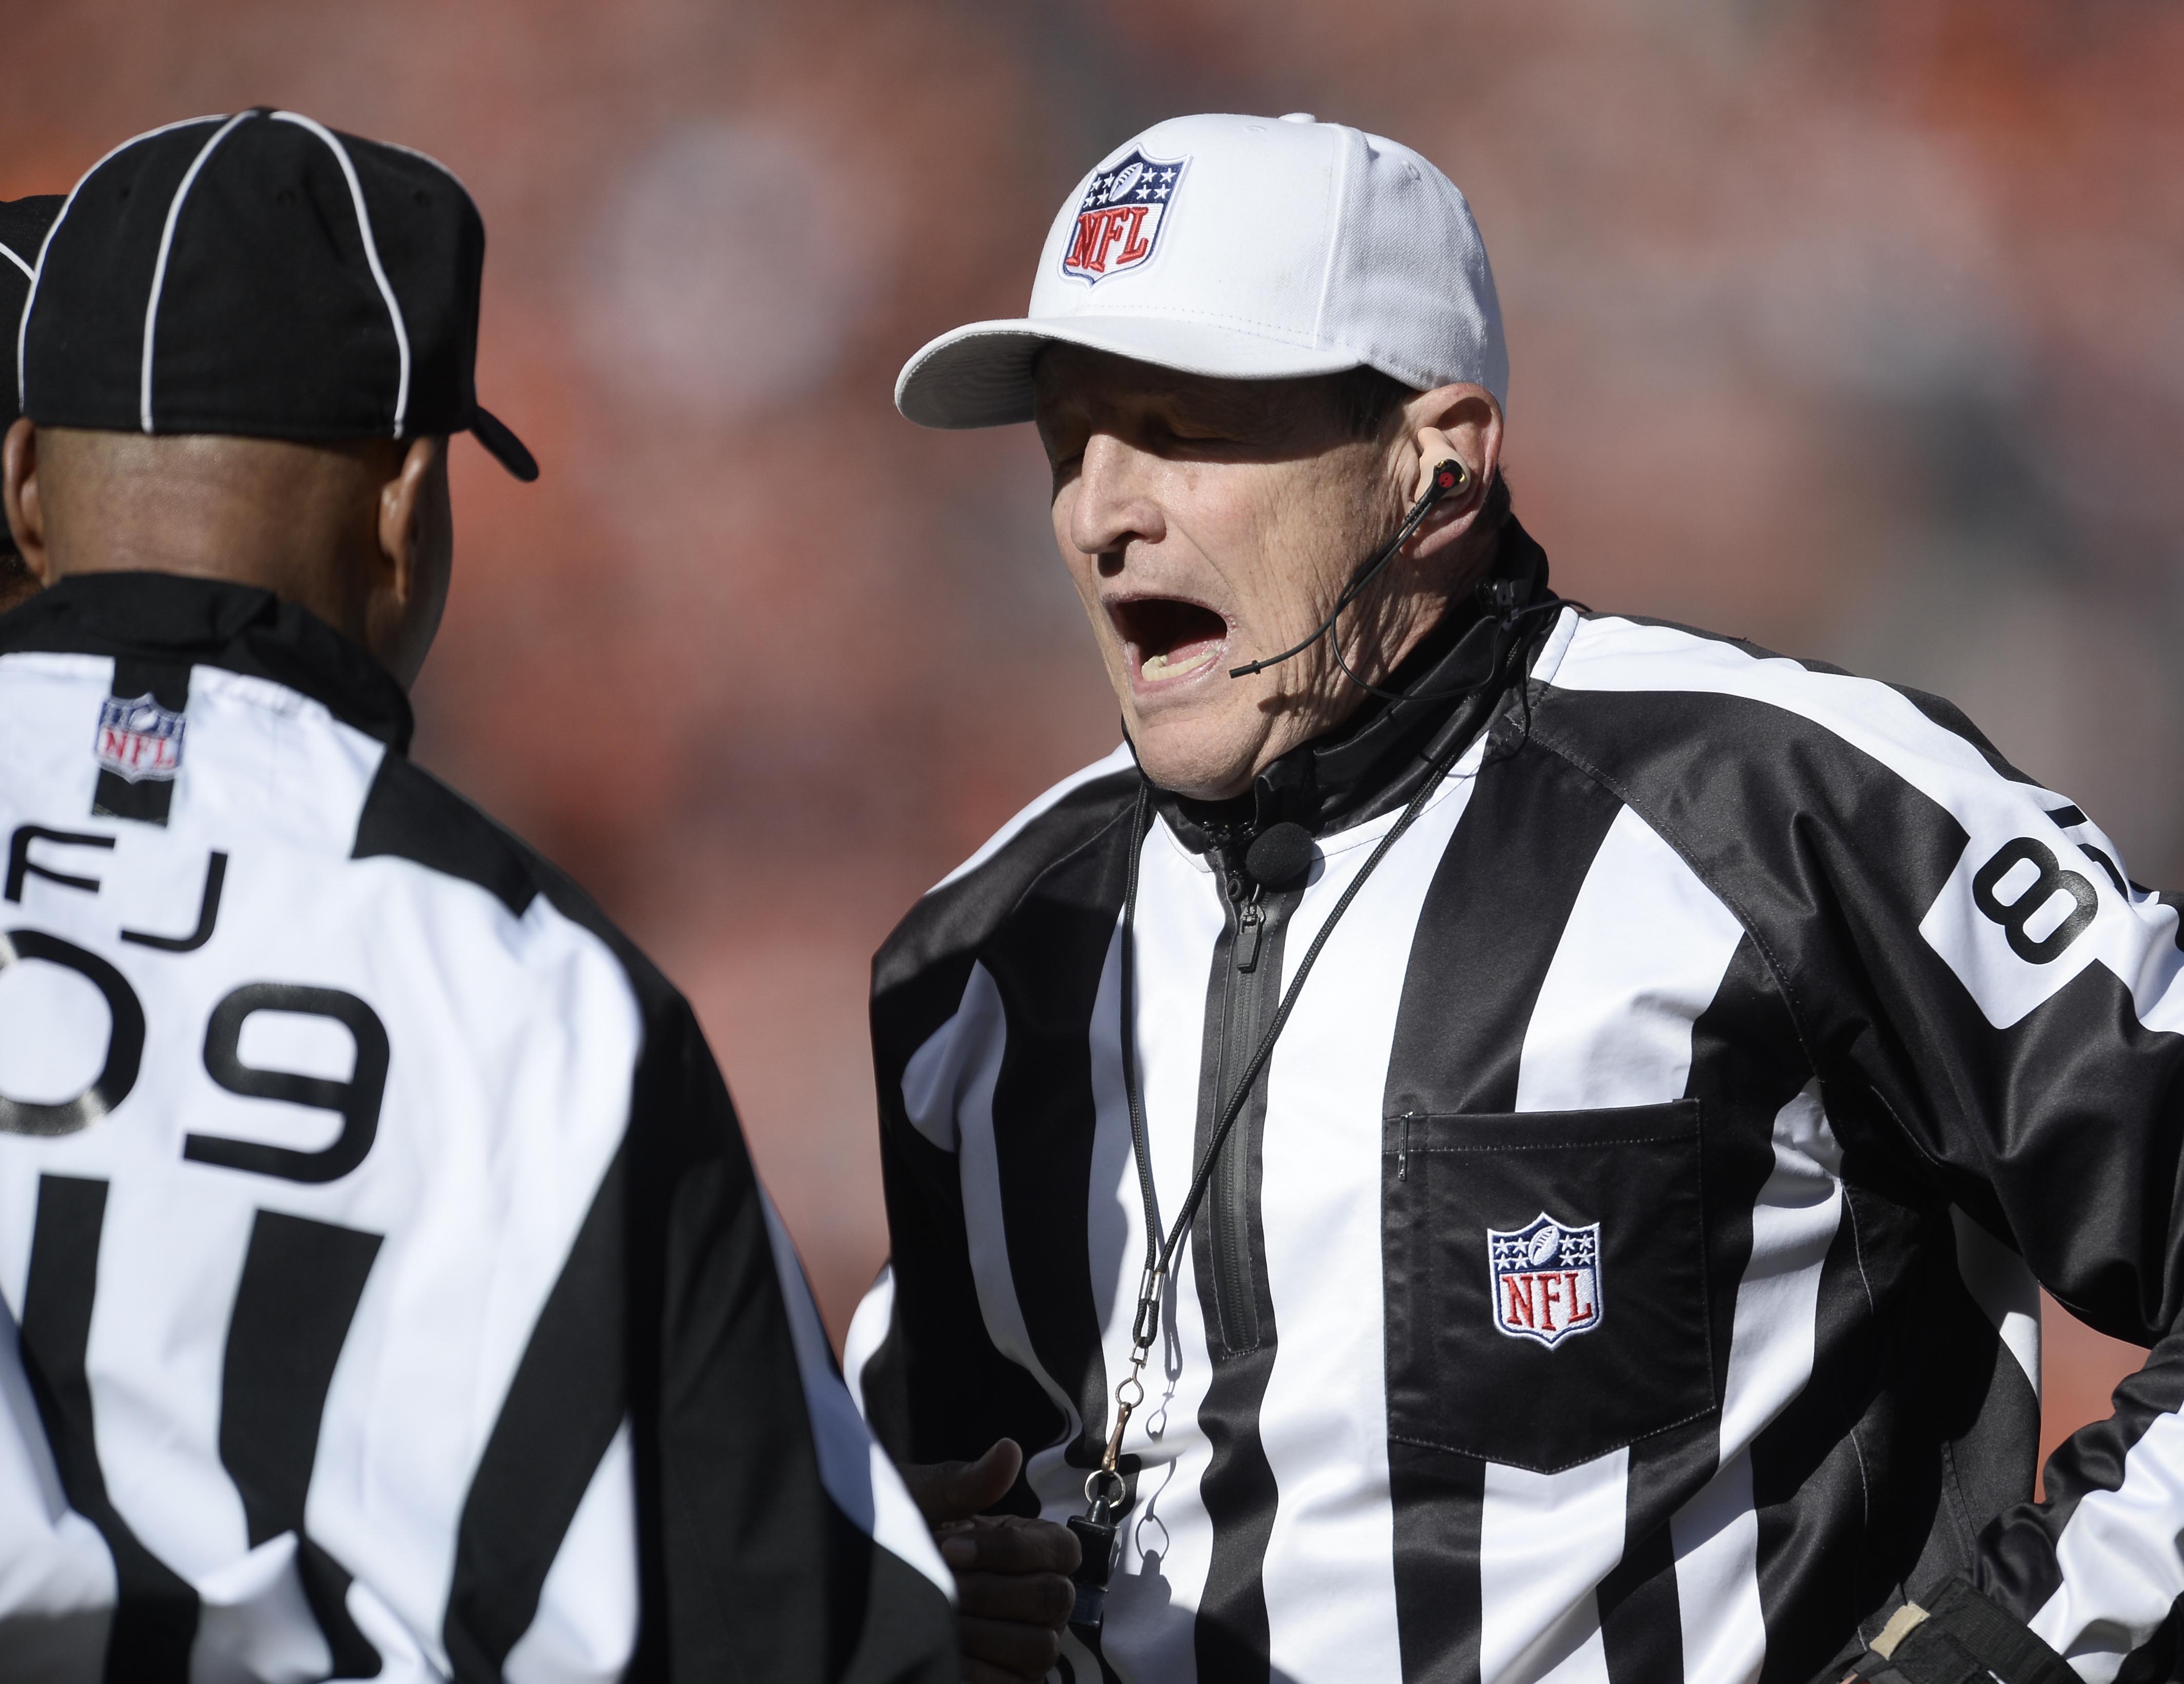 Ed Camp makes final call of 22-year career as NFL referee